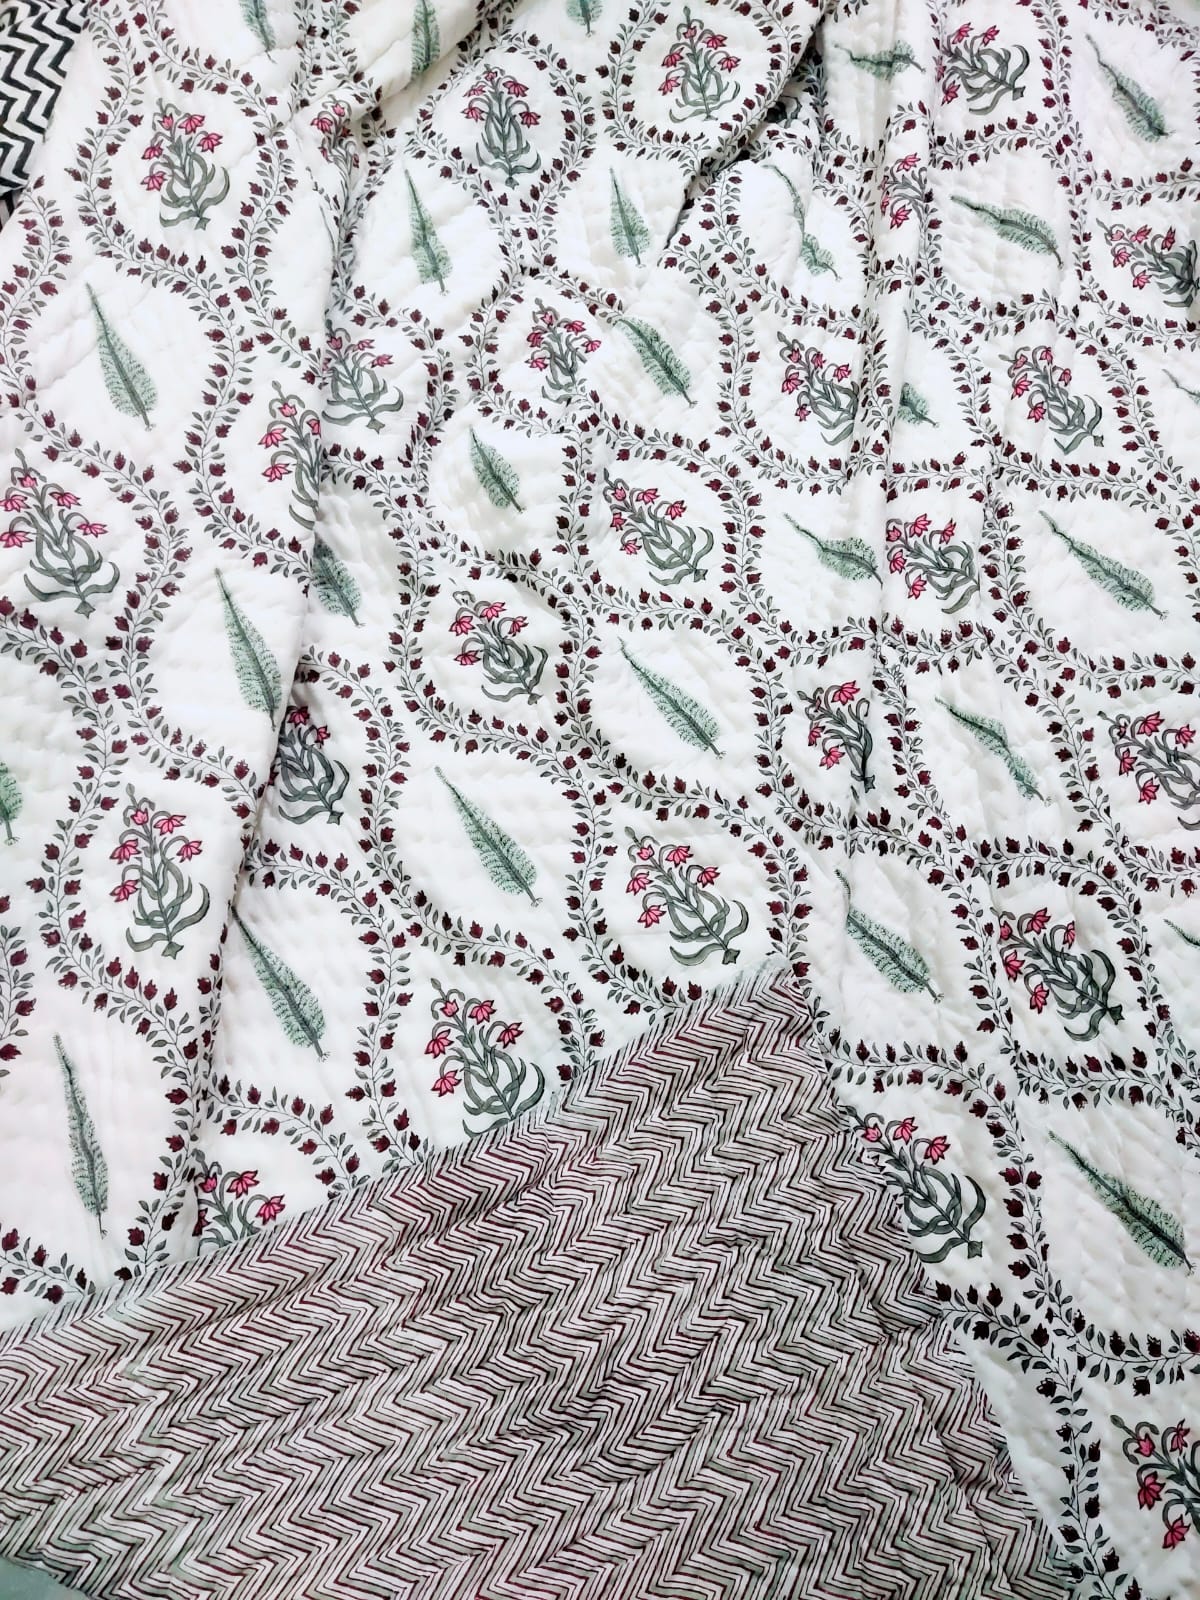 Floral Jaal Light Cotton Muslin Block Printed Reversible Quilt - Double Size 90x108 inches